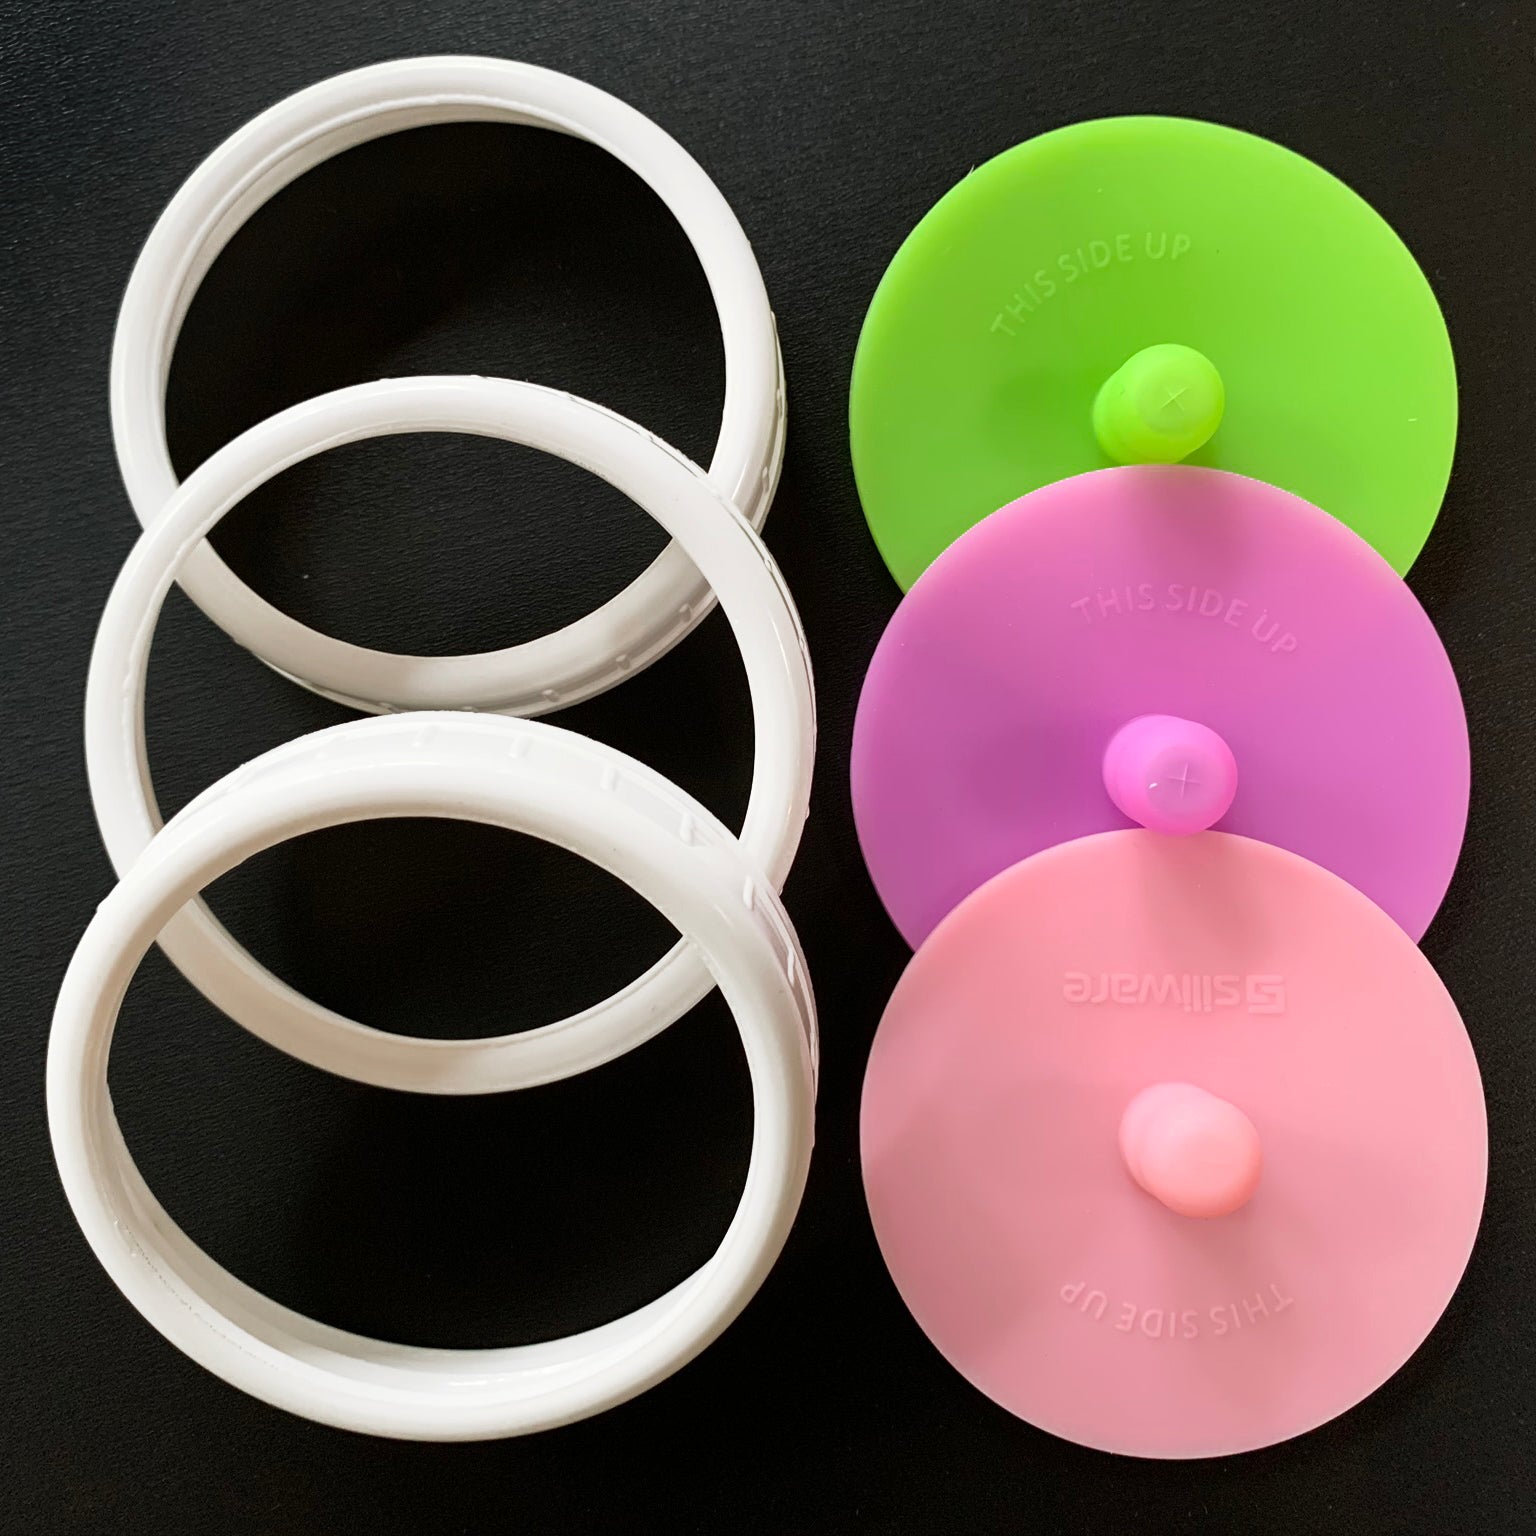 https://cdn.shopify.com/s/files/1/0650/9435/products/new_silicone_airlocks_1536x1536.jpg?v=1646698744